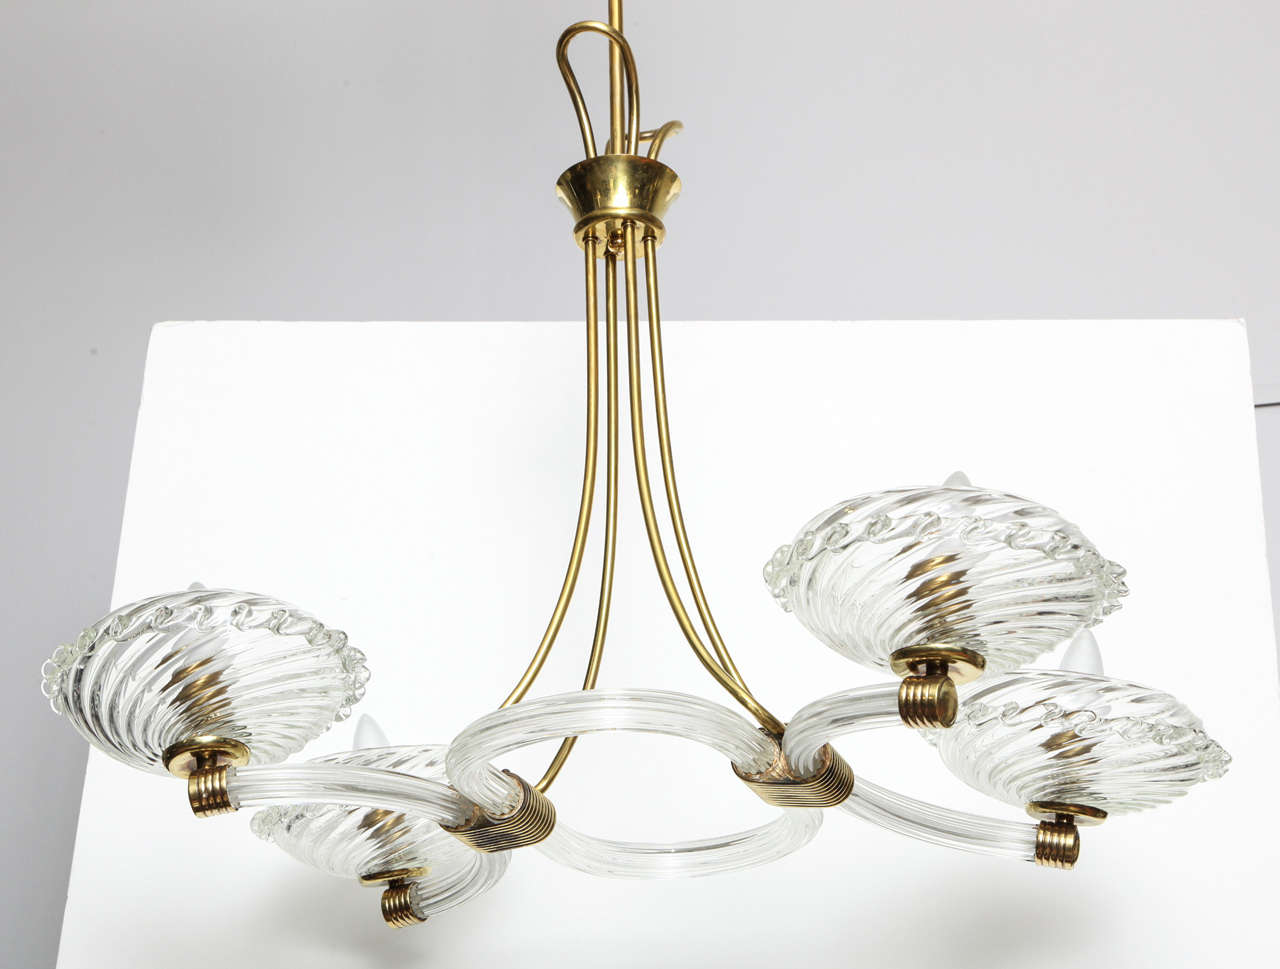 Art Deco Murano chandelier with fluted glass bowls.